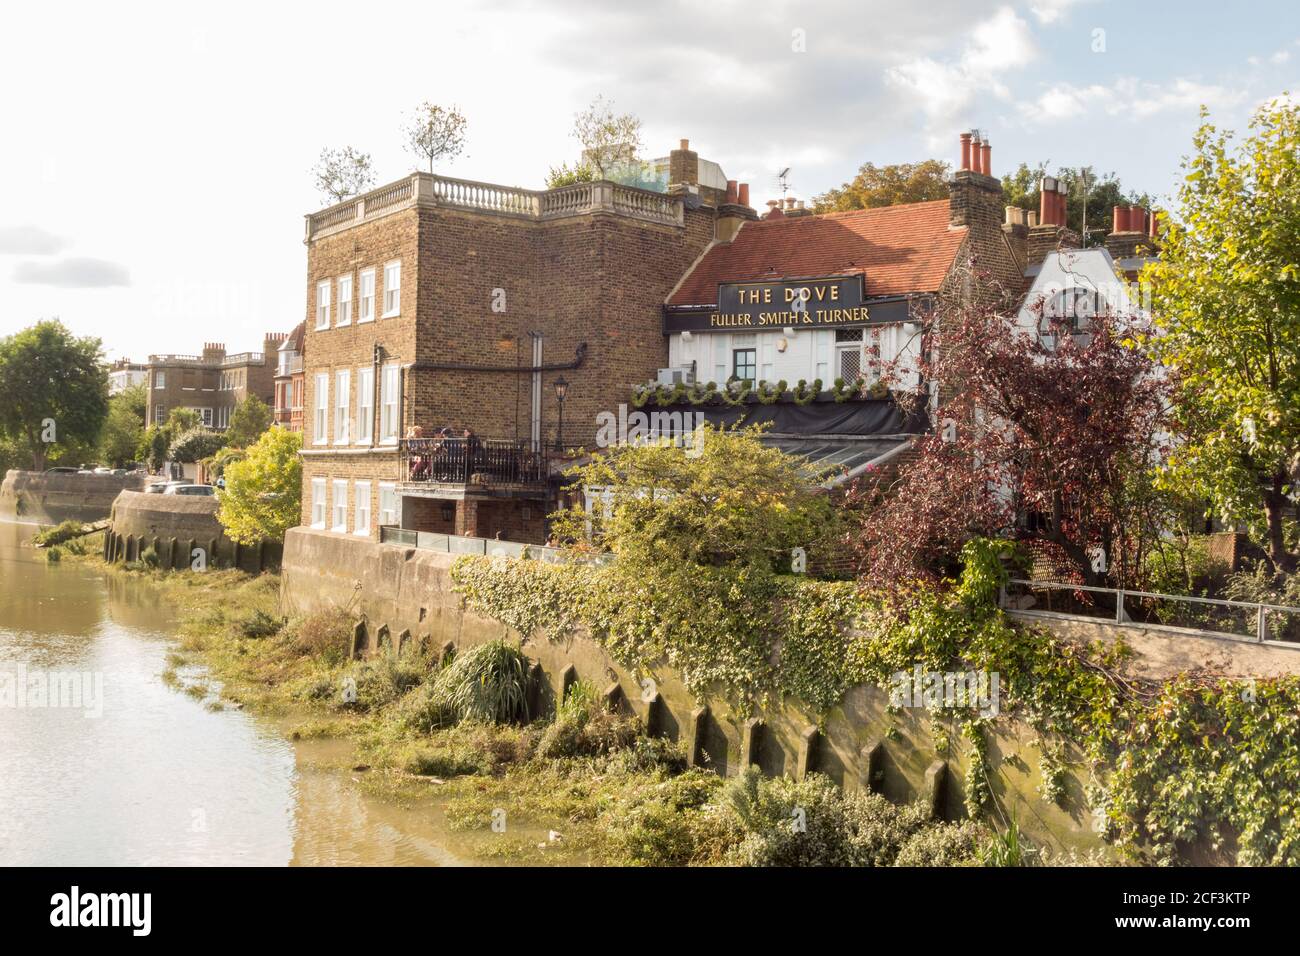 The Dove Public House, next to the River Thames in Hammersmith, West London, England, U.K. Stock Photo